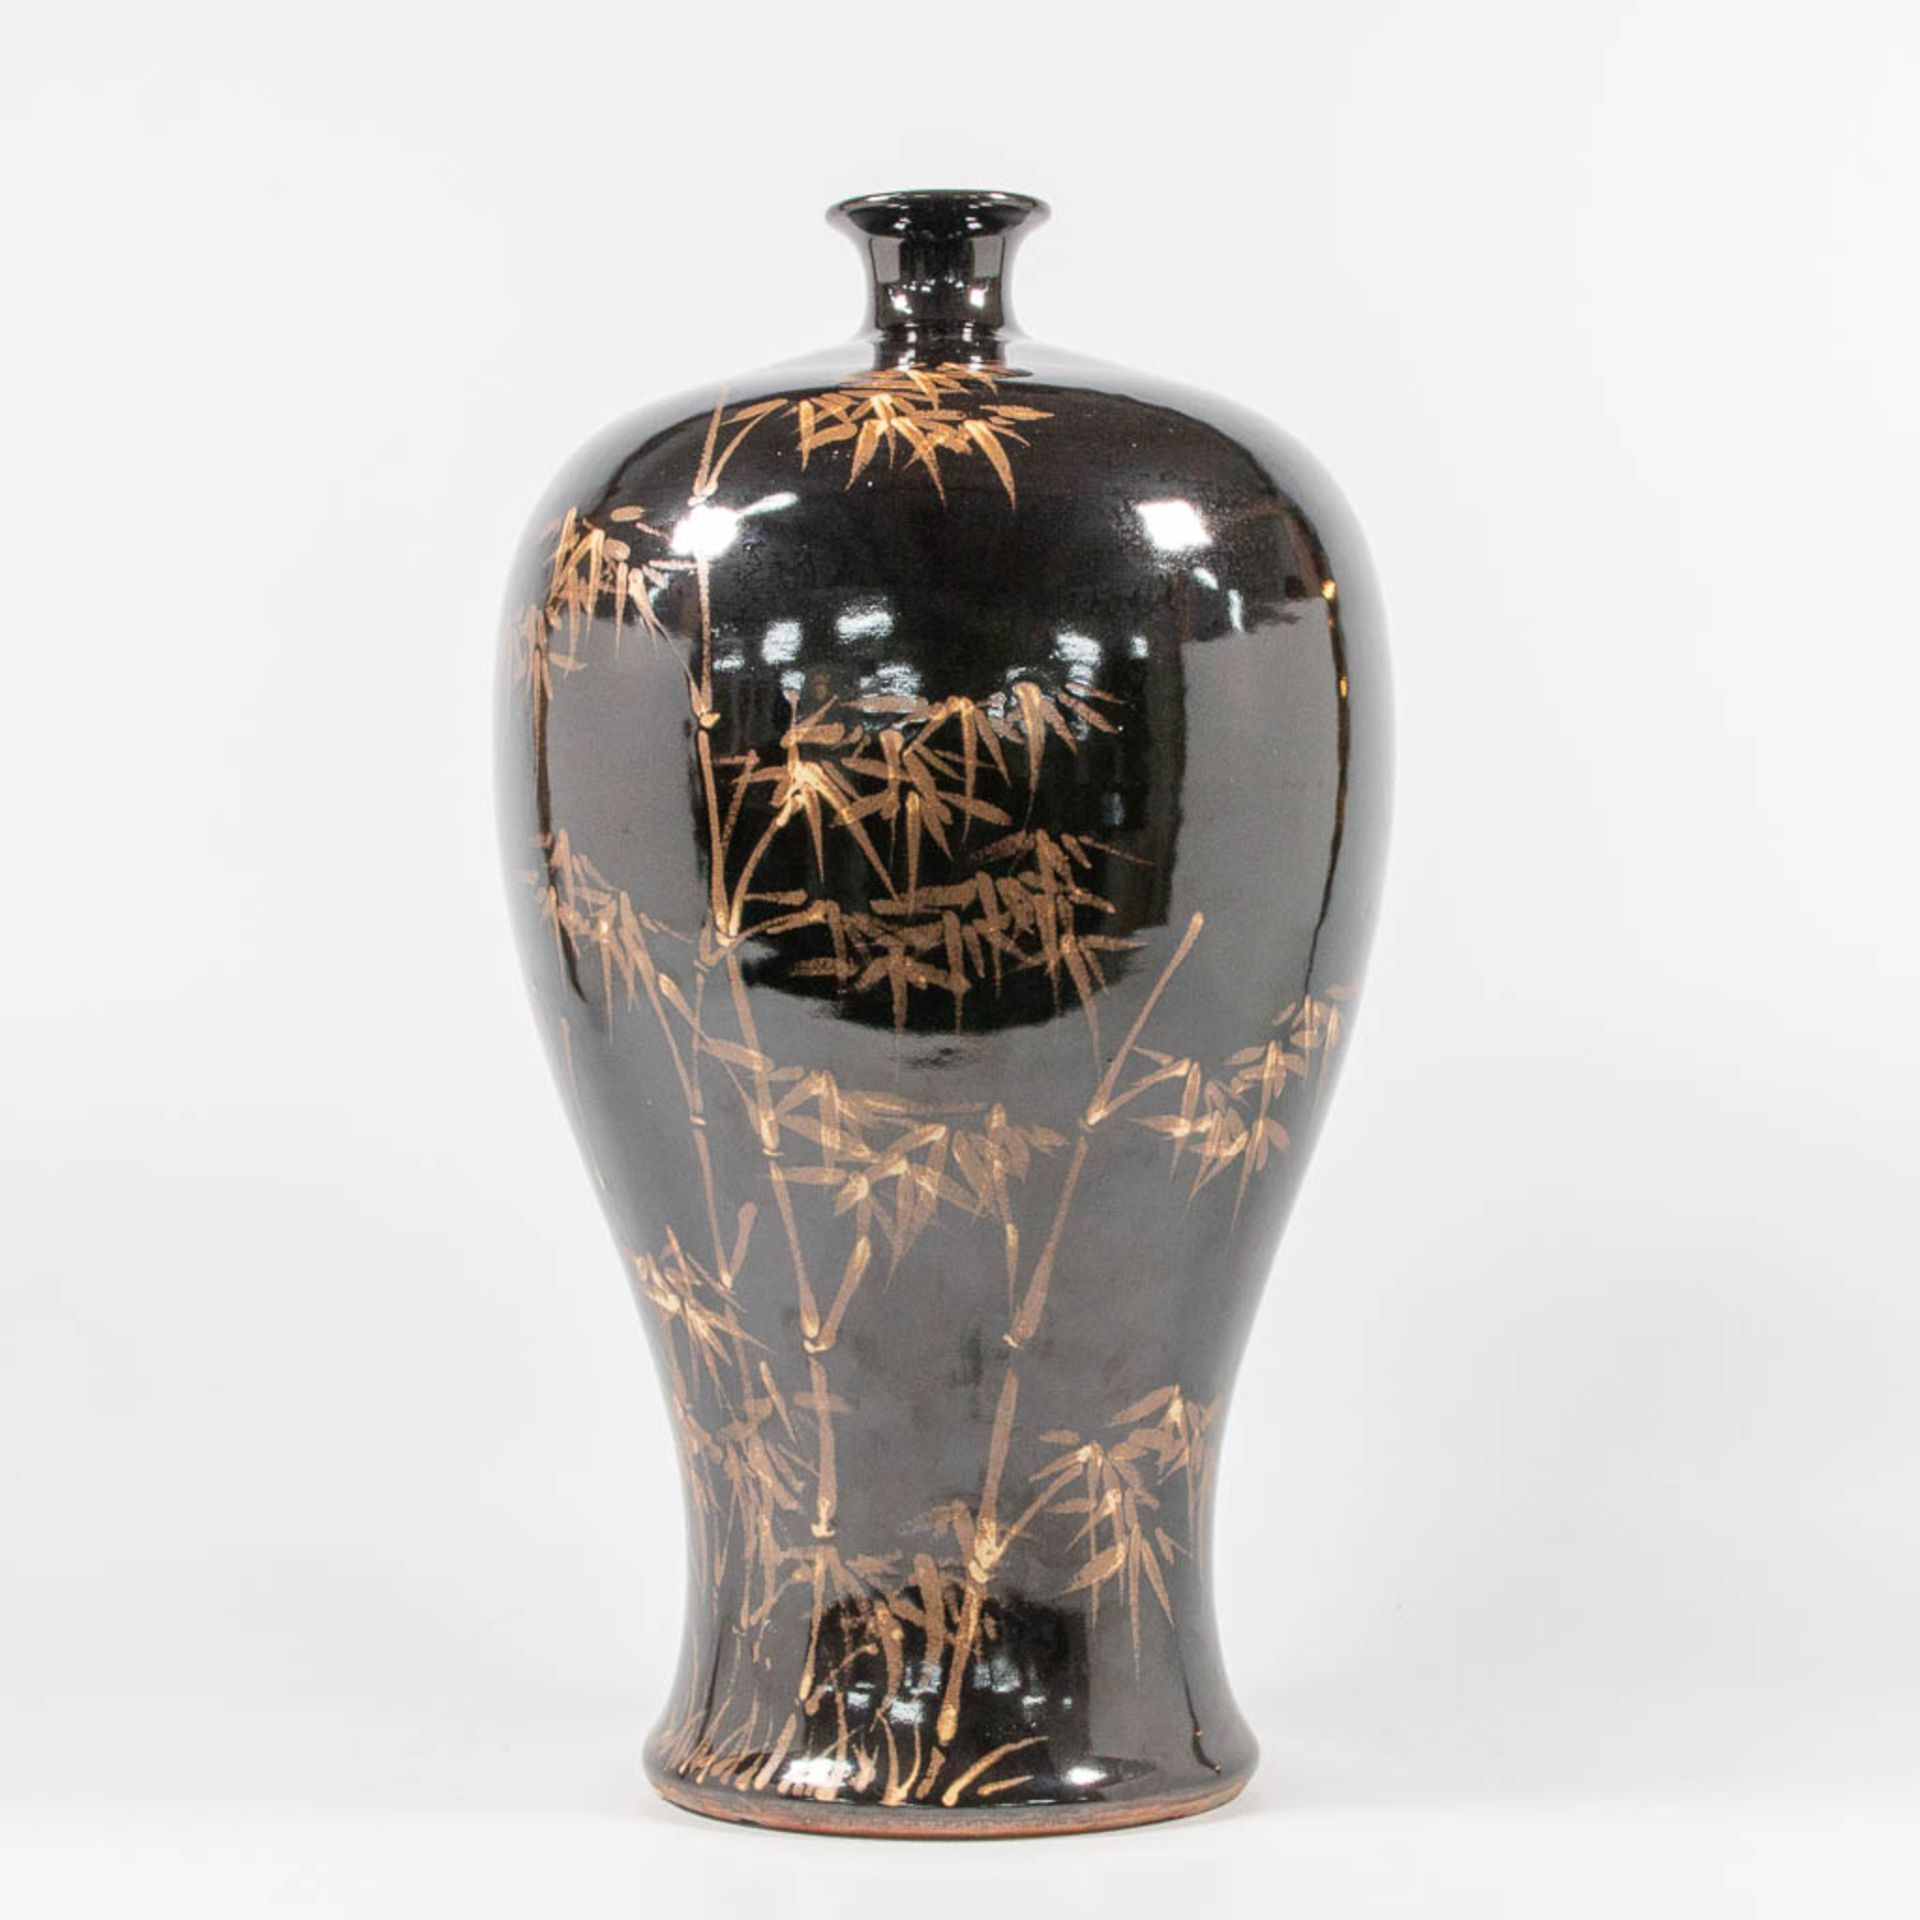 An Asian Vase with black and gold bamboo decor